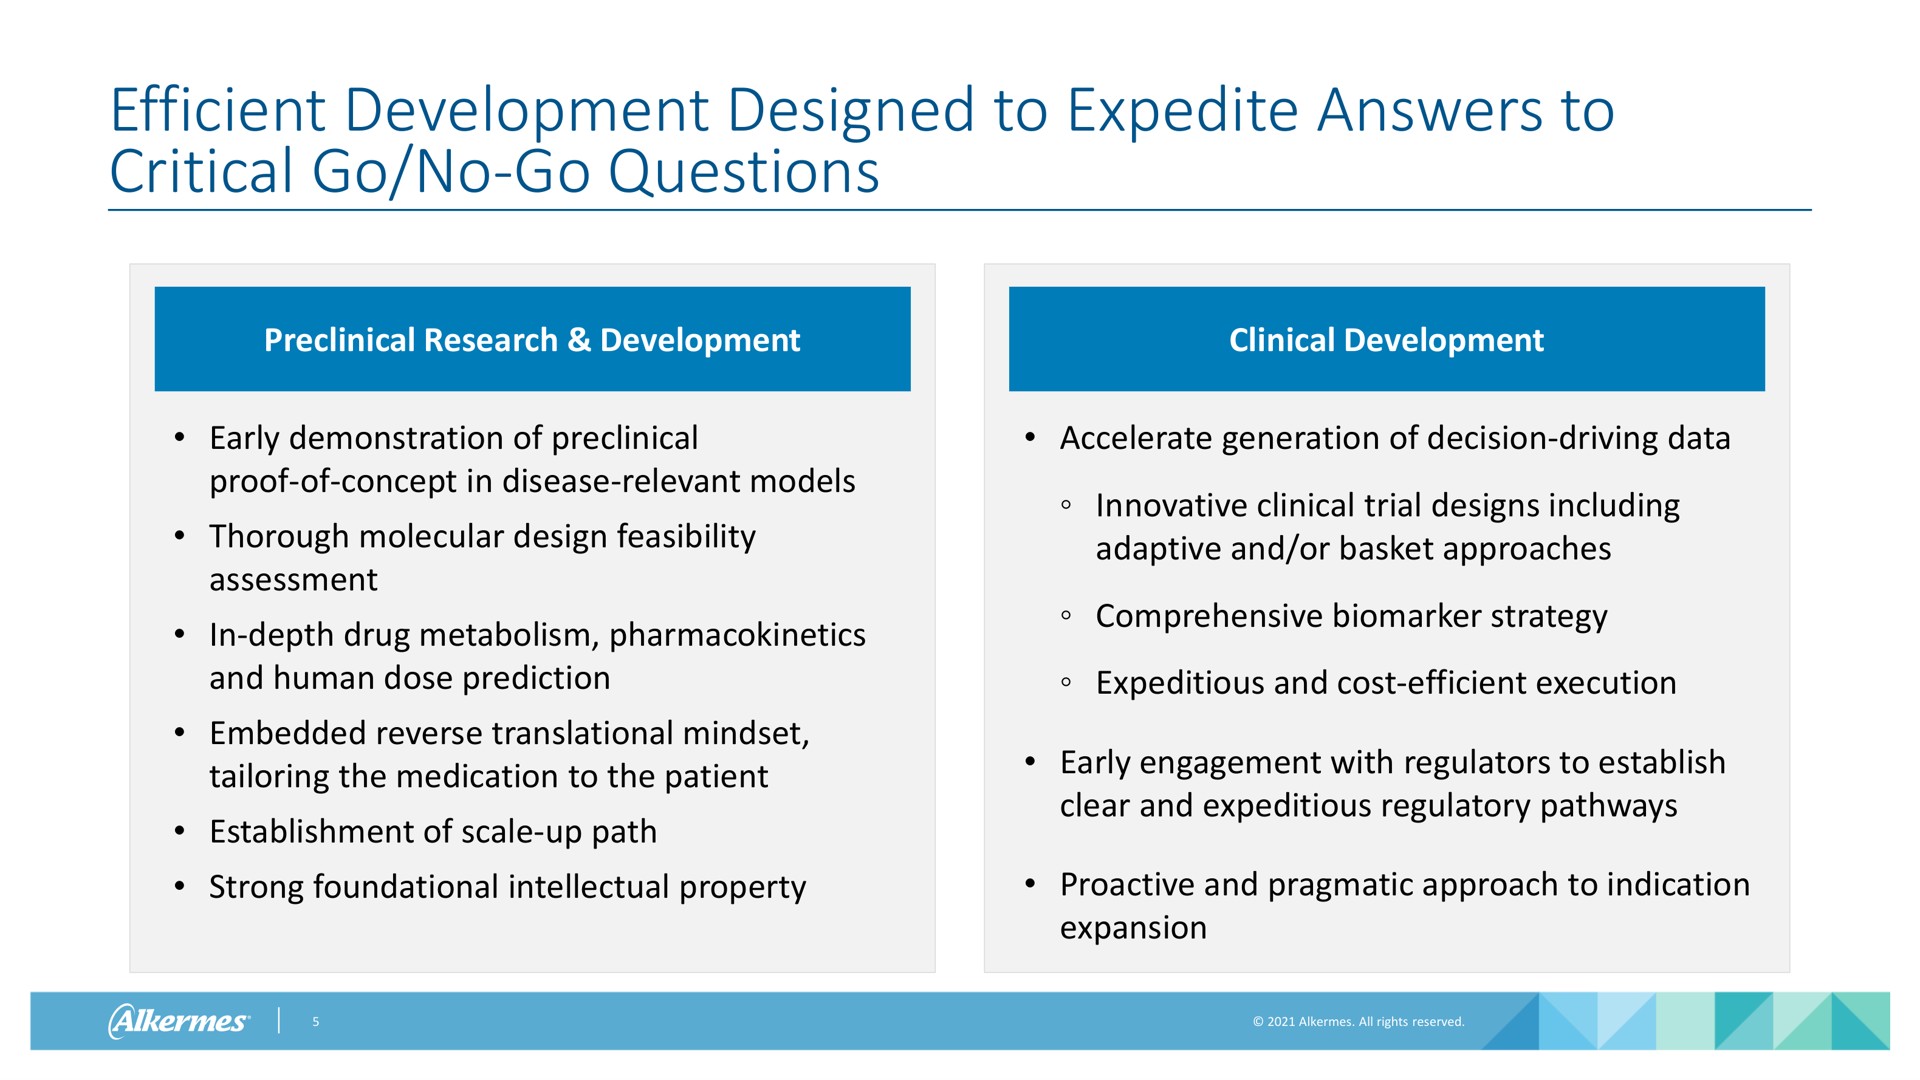 efficient development designed to expedite answers to critical go no go questions preclinical research development clinical development early demonstration of preclinical proof of concept in disease relevant models thorough molecular design feasibility assessment in depth drug metabolism and human dose prediction embedded reverse translational tailoring the medication to the patient establishment of scale up path accelerate generation of decision driving data innovative clinical trial designs including adaptive and or basket approaches comprehensive strategy expeditious and cost efficient execution early engagement with regulators to establish clear and expeditious regulatory pathways strong foundational intellectual property and pragmatic approach to indication expansion | Alkermes